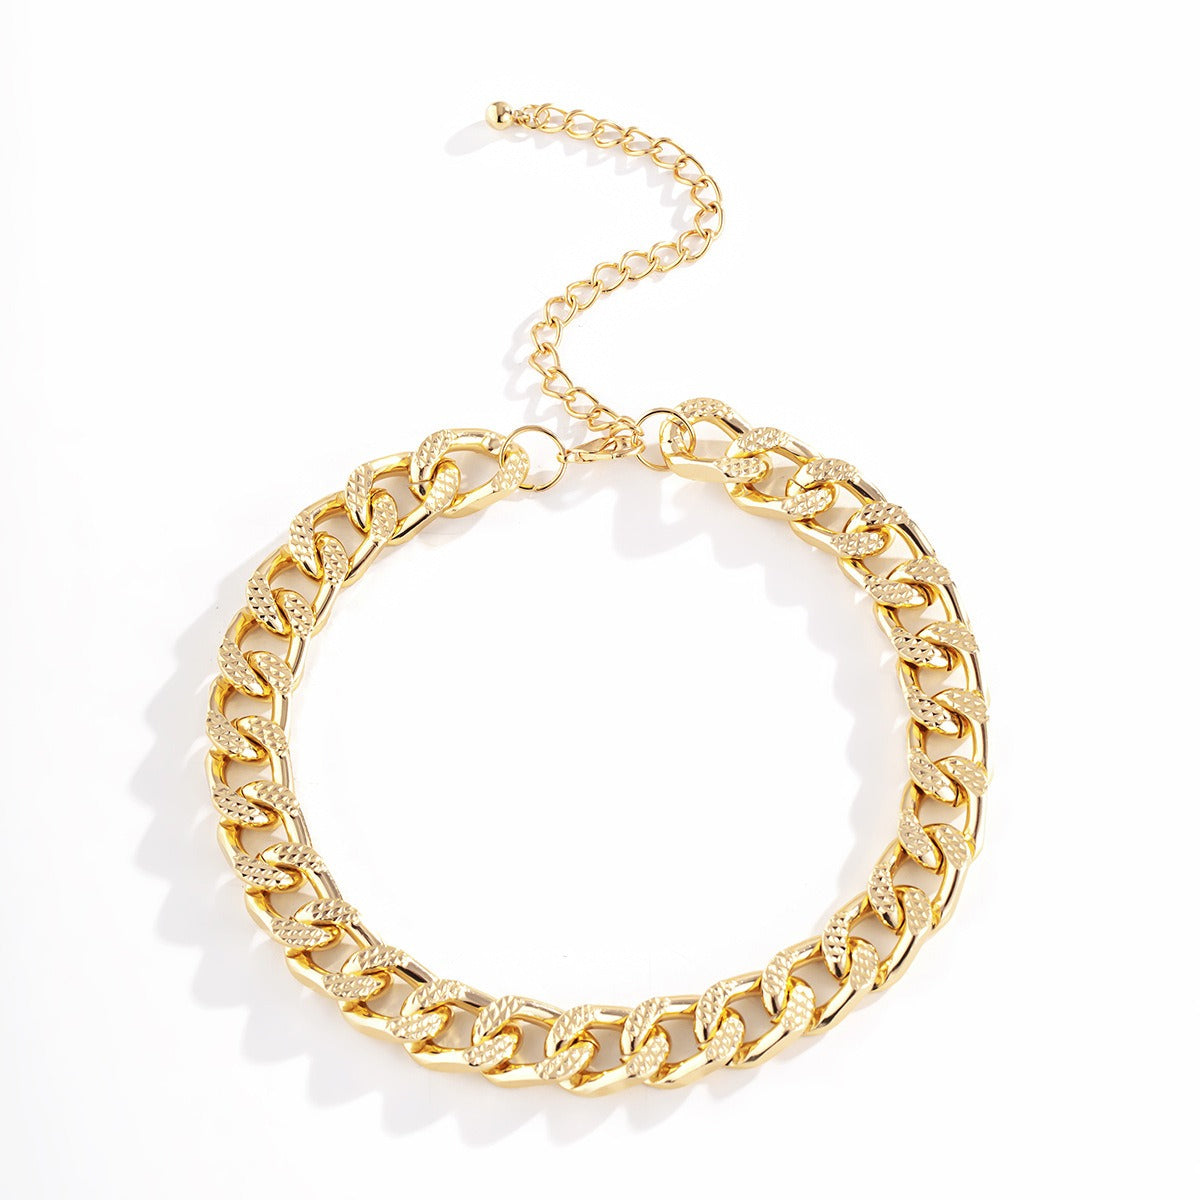 Minimalist Pitted Metal Single Layer Chain Necklace